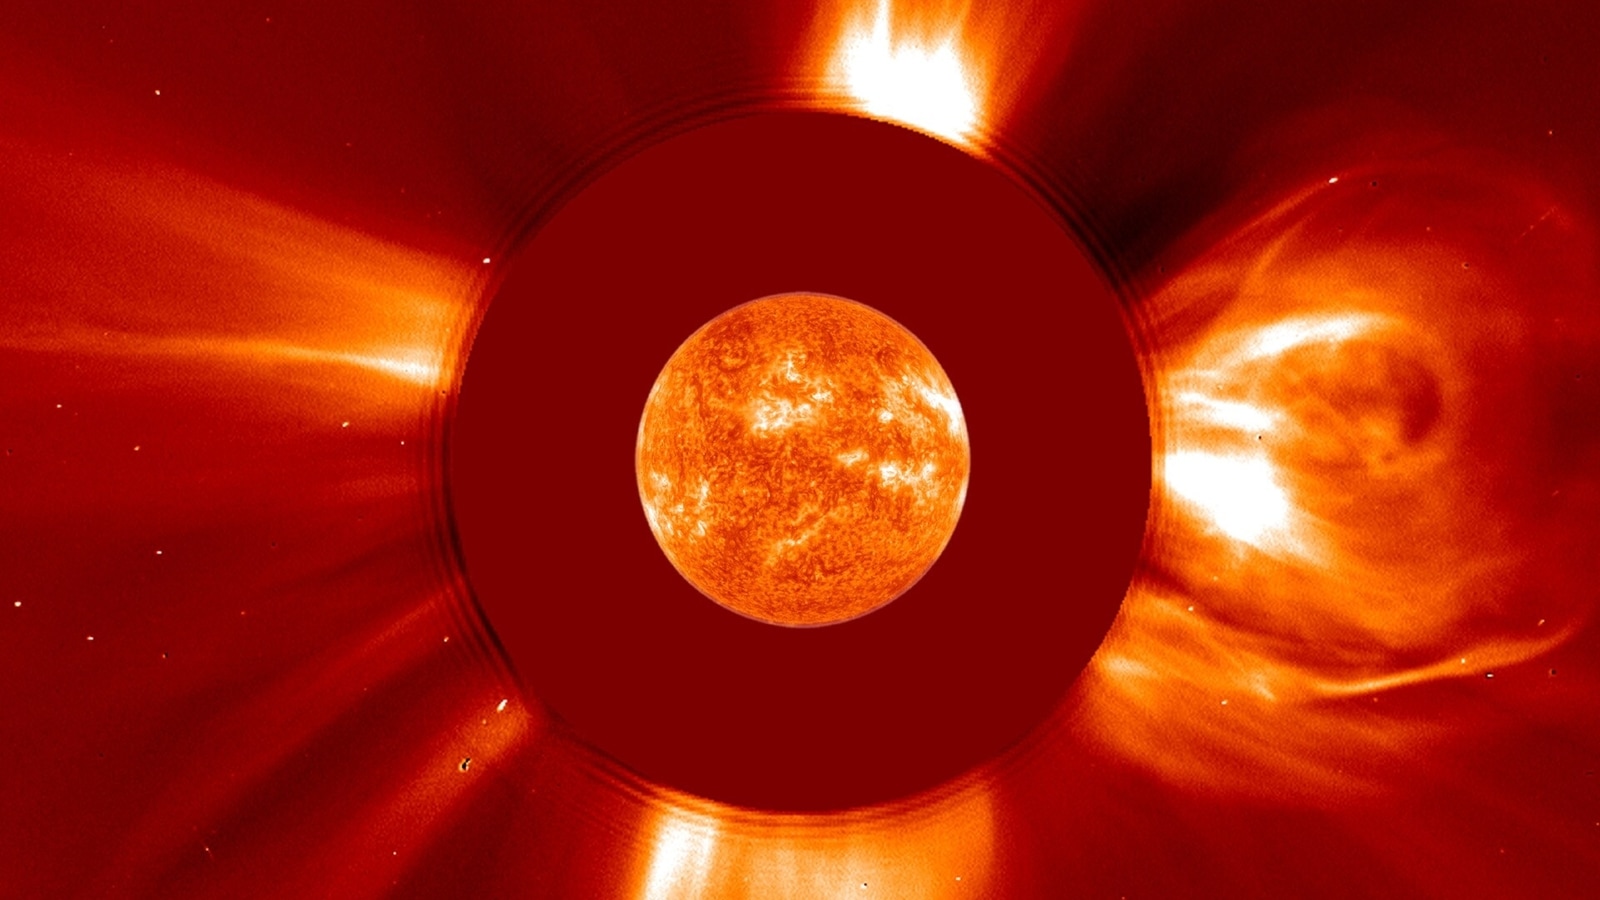 Do you know when the biggest solar flare ever was recorded? NASA reveals Tech News